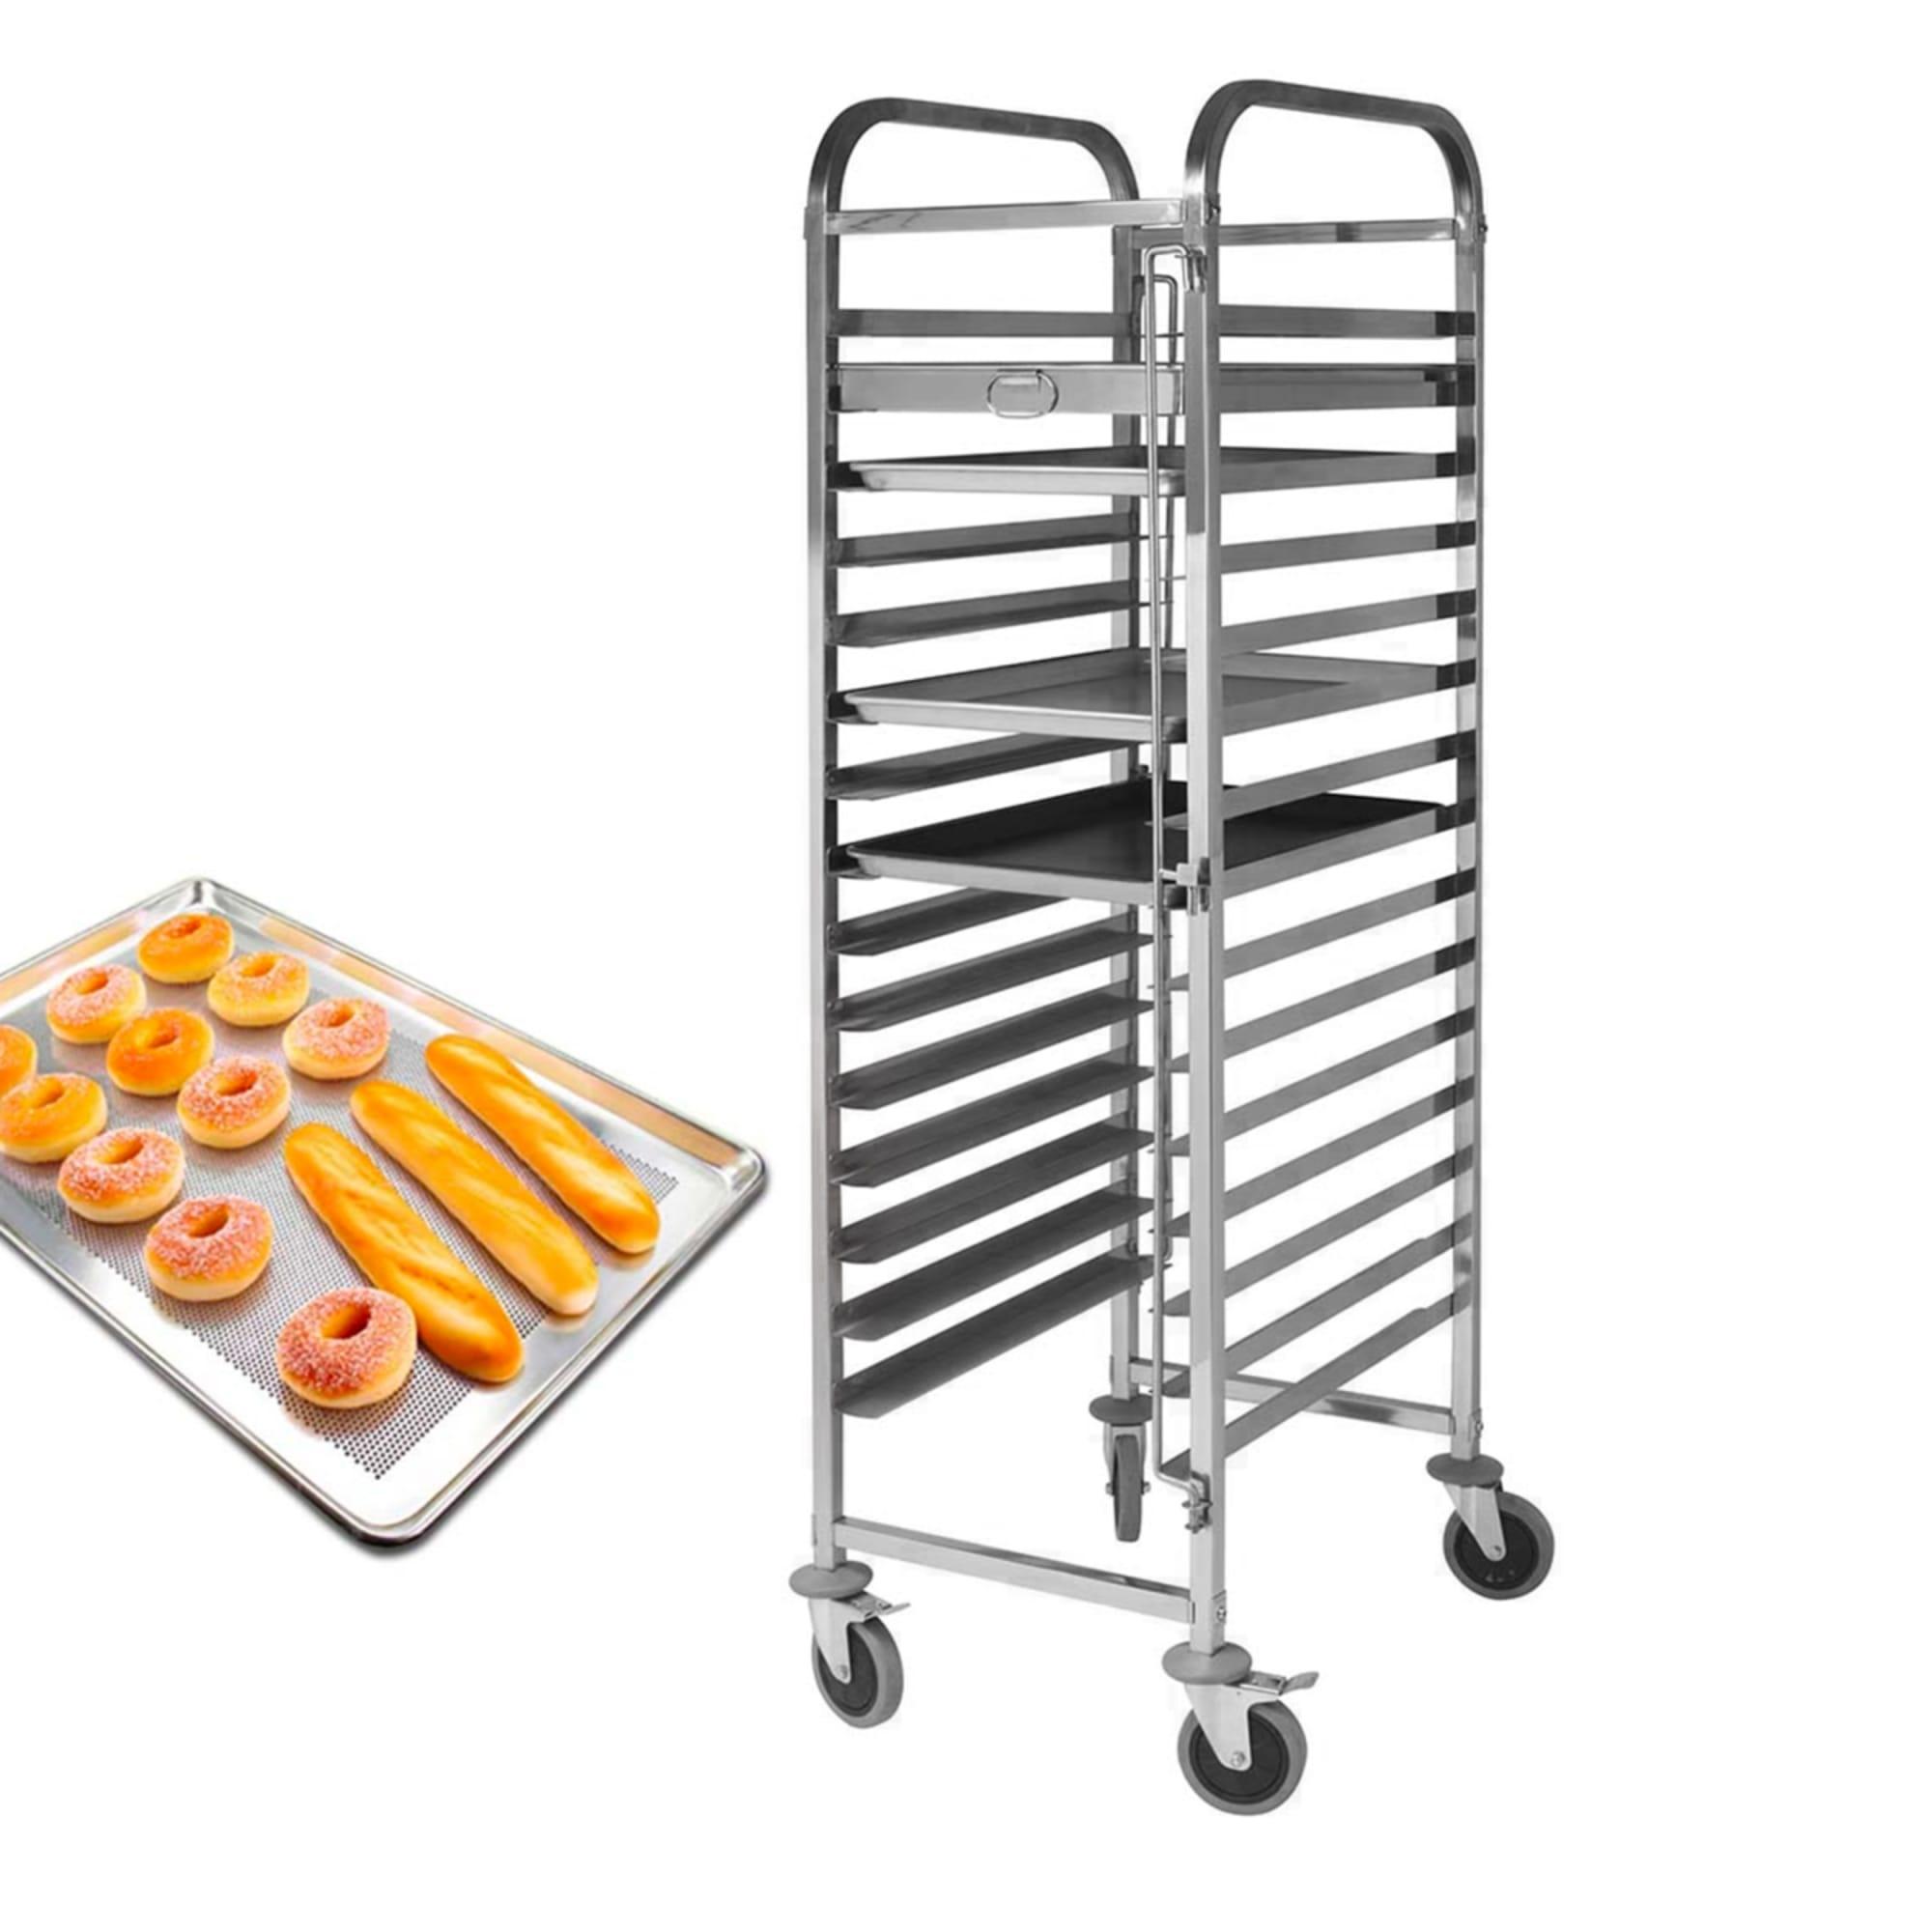 Soga Stainless Steel Gastronorm Trolley 16 Tier Suits 60x40cm Trays Set of 2 Image 3